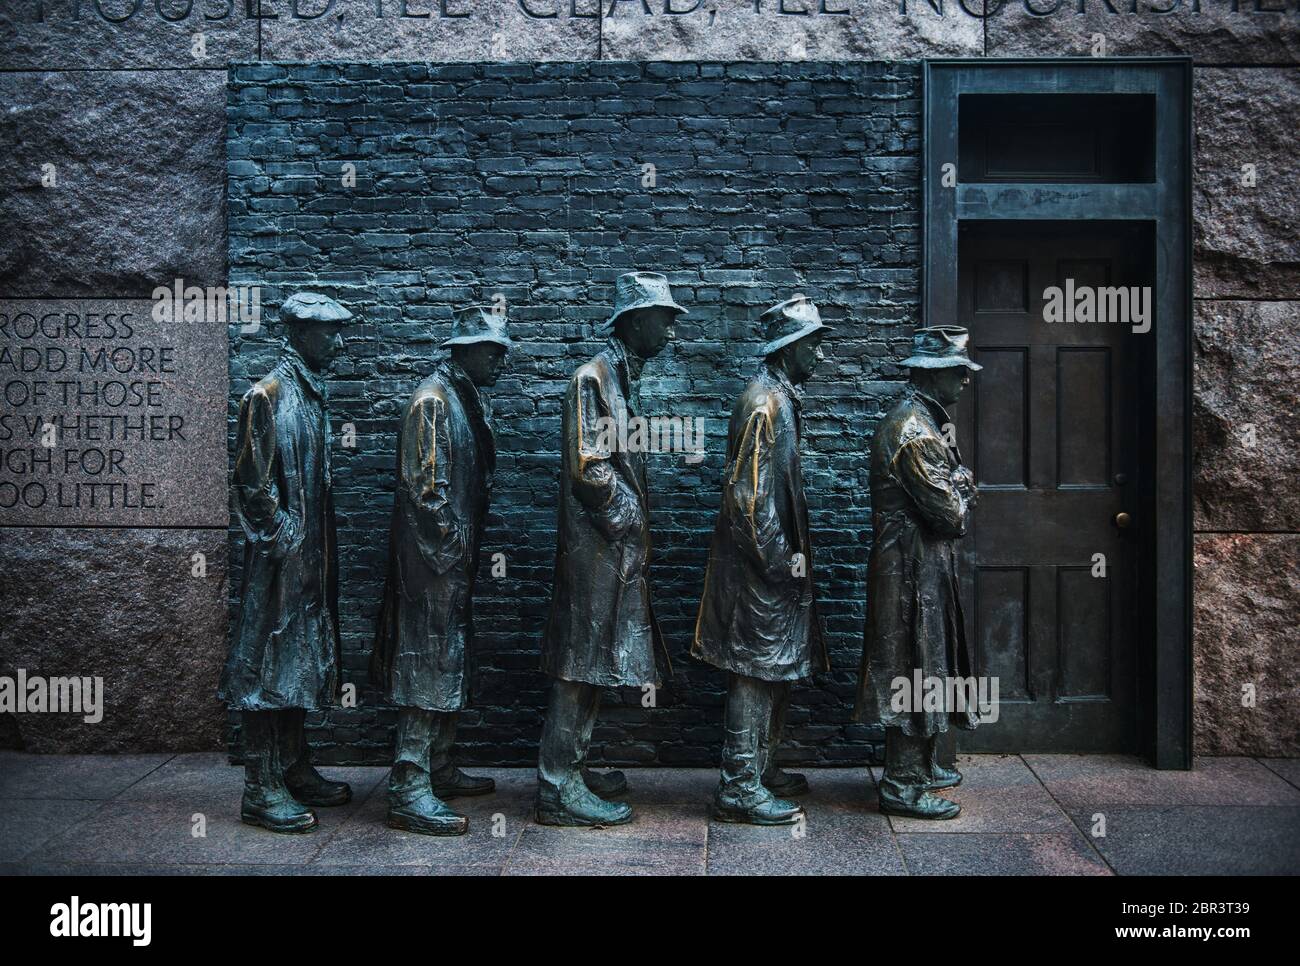 The Bread Line sculpture by George Segal depicting a scene from the Great Depression, Franklin Delano Roosevelt memorial, Washington D.C., United Stat Stock Photo